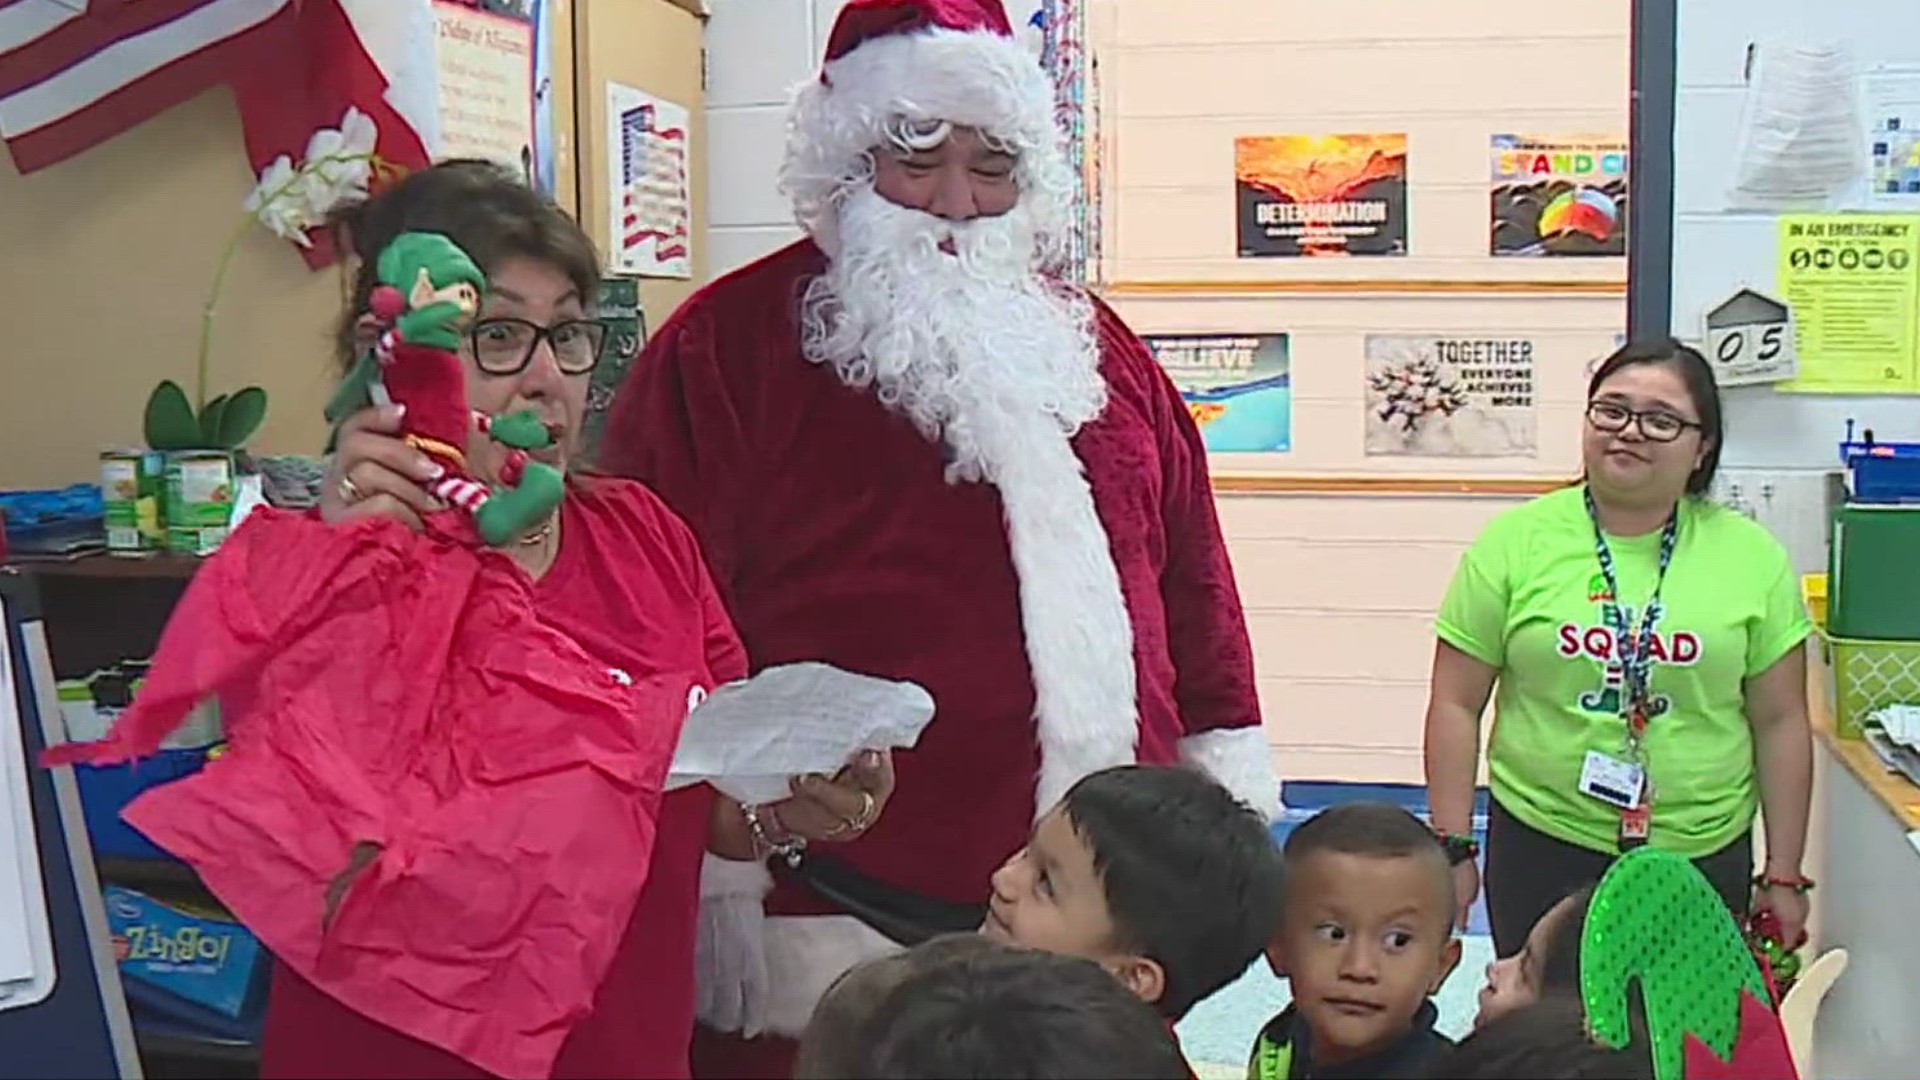 Santa came by Thursday to drop off an Elf on the Shelf to students in grades Pre-K through second grade.